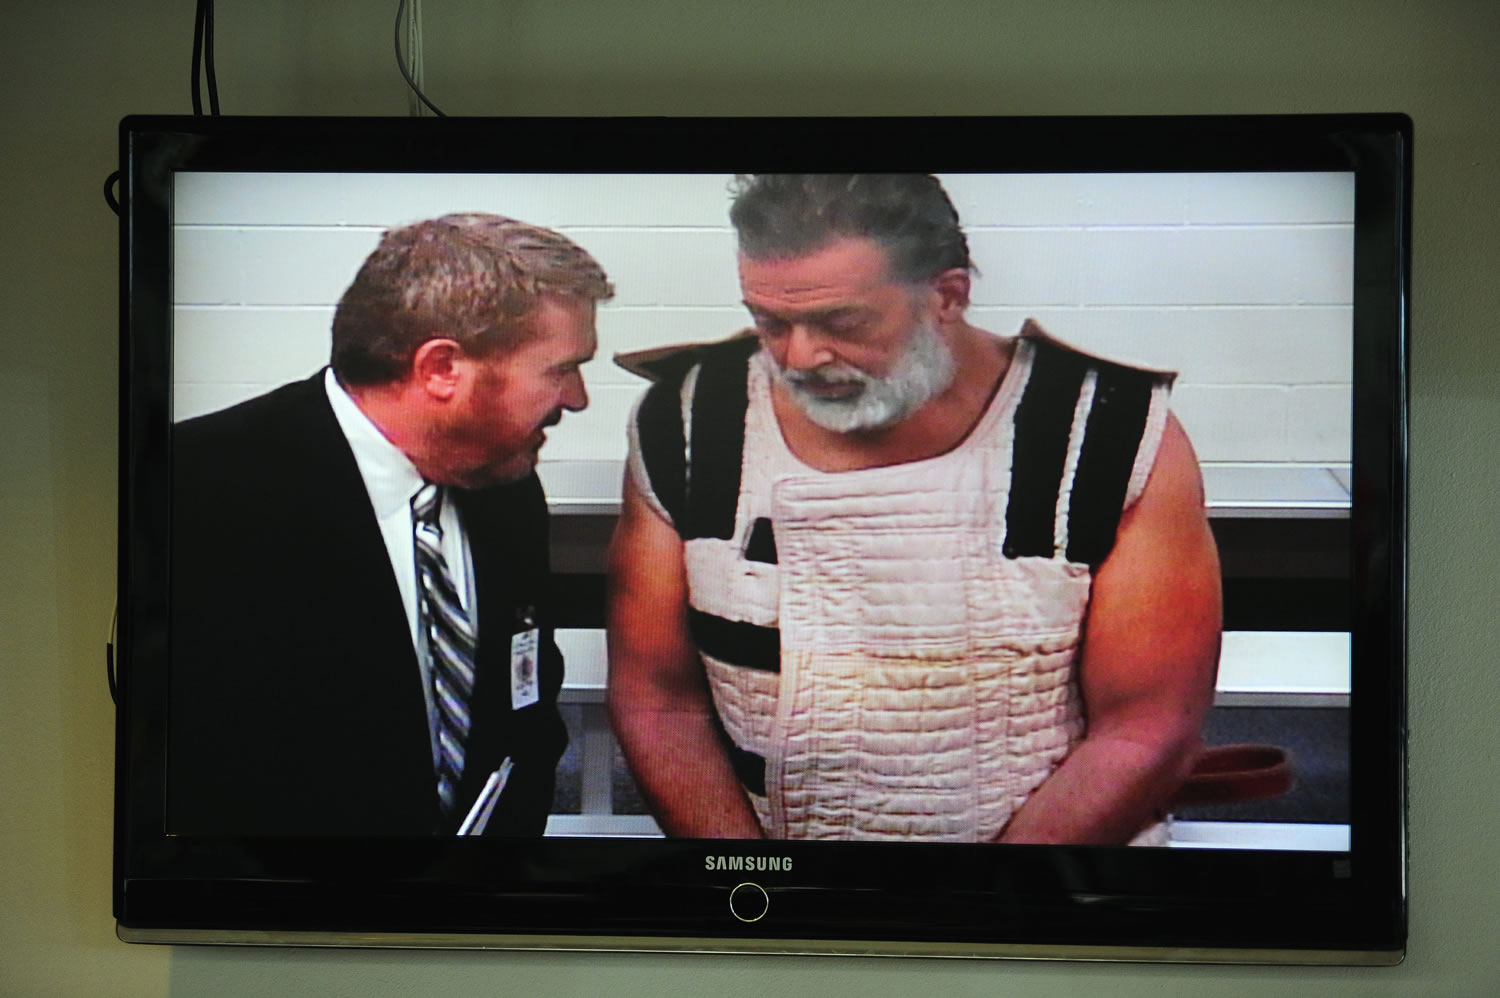 Robert Dear, the suspect in a shooting at a Planned Parenthood clinic in Colorado Springs, Colo., right, appears via video Nov. 30 before Judge Gilbert Martinez, with public defender Dan King, at the El Paso County Criminal Justice Center for his first court appearance.